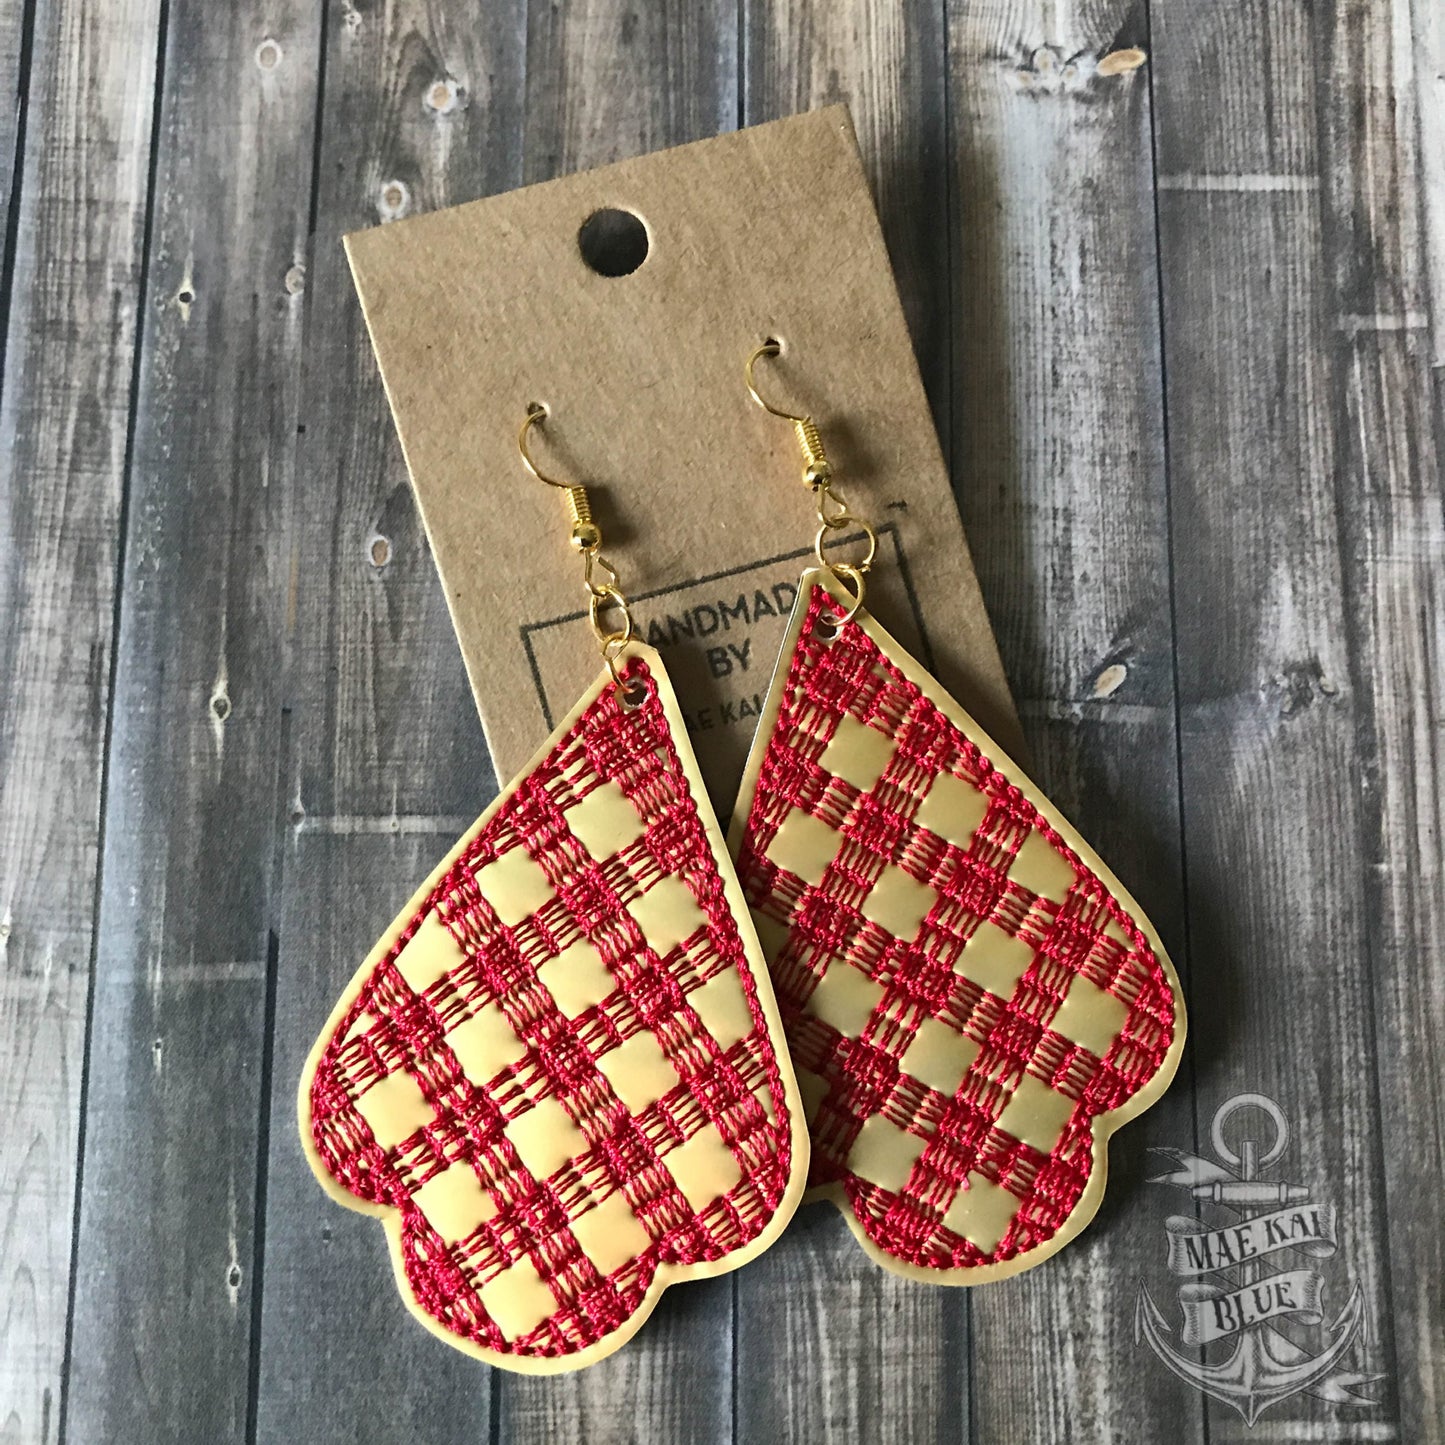 Plaid Earrings - 3 sizes - 4x4 and 5x7 Grouped- Digital Embroidery Design